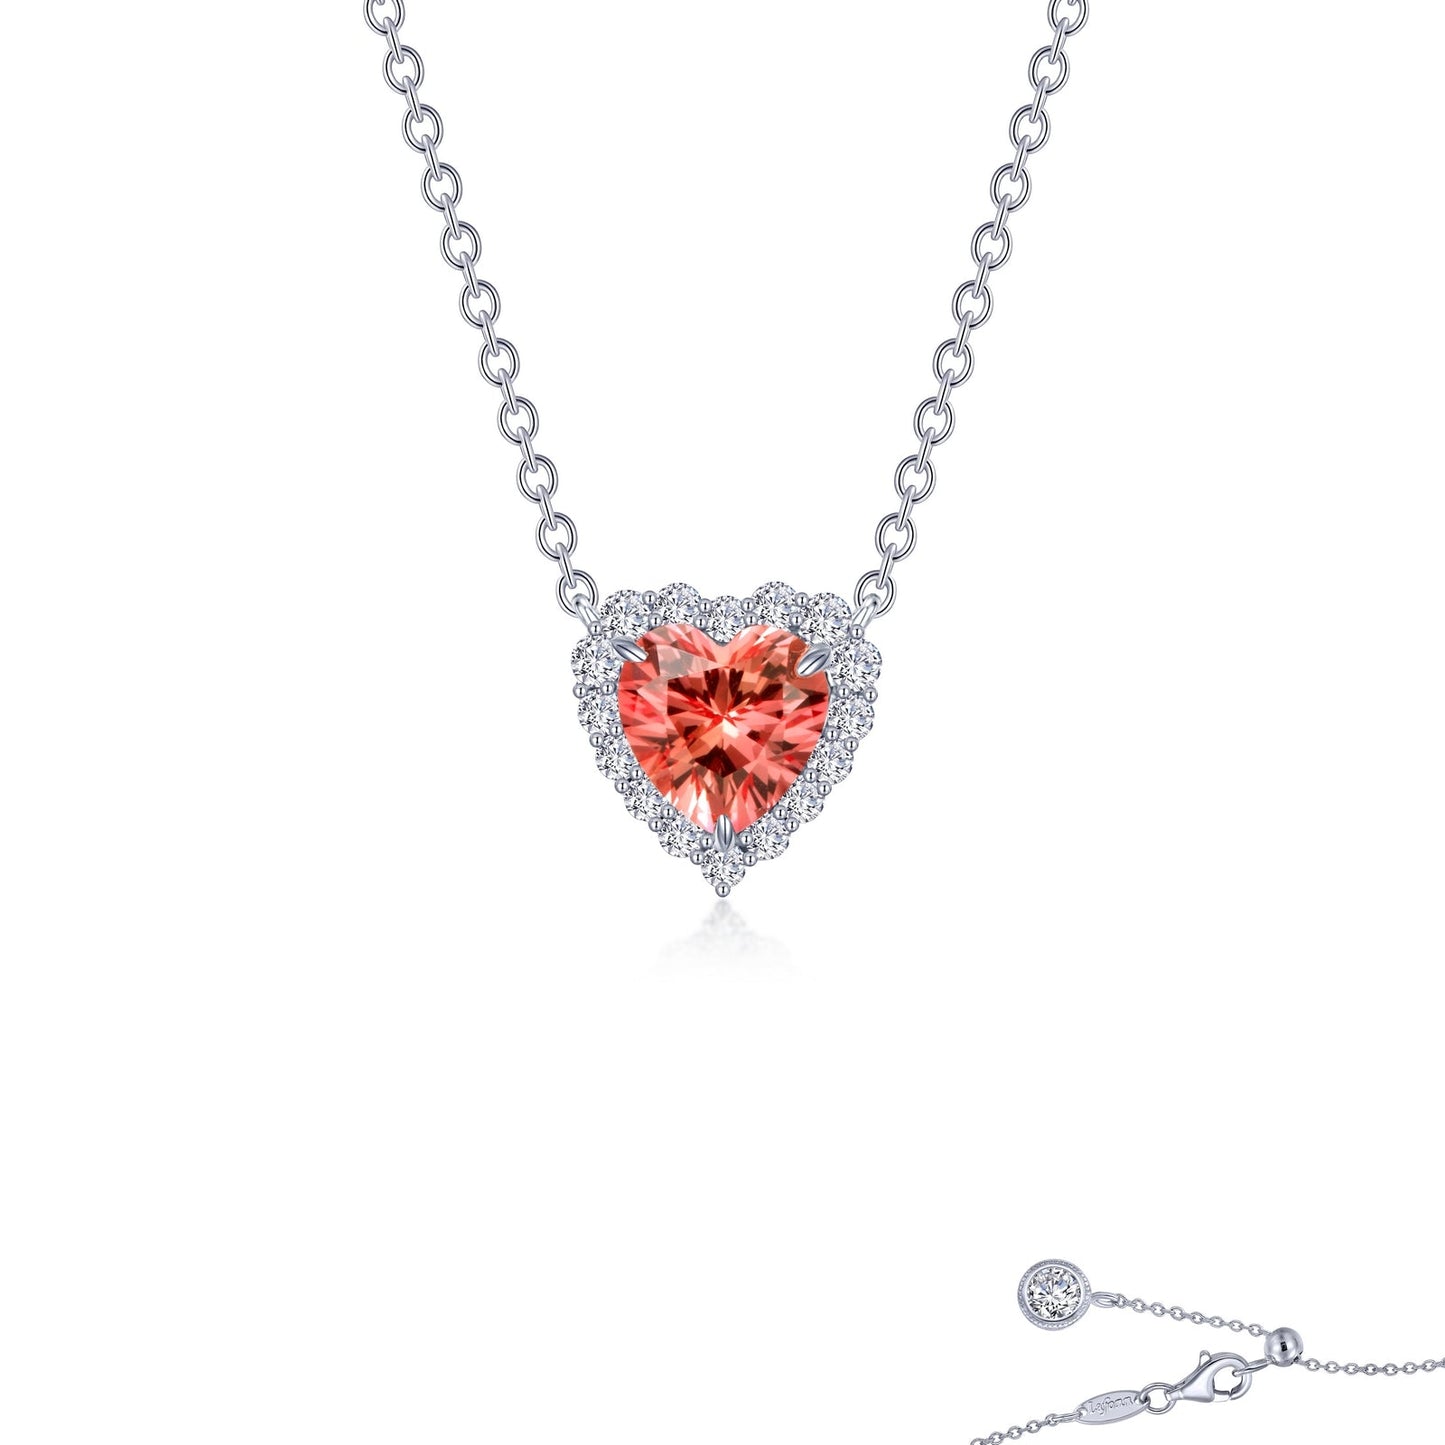 Load image into Gallery viewer, Lafonn Fancy Lab-Grown Sapphire Halo Heart Necklace RUBY CORUNDUM NECKLACES Platinum Appx CTW: 1.64 cts. CTS Approx. 10.5mm (H) x 10.5mm (W)
